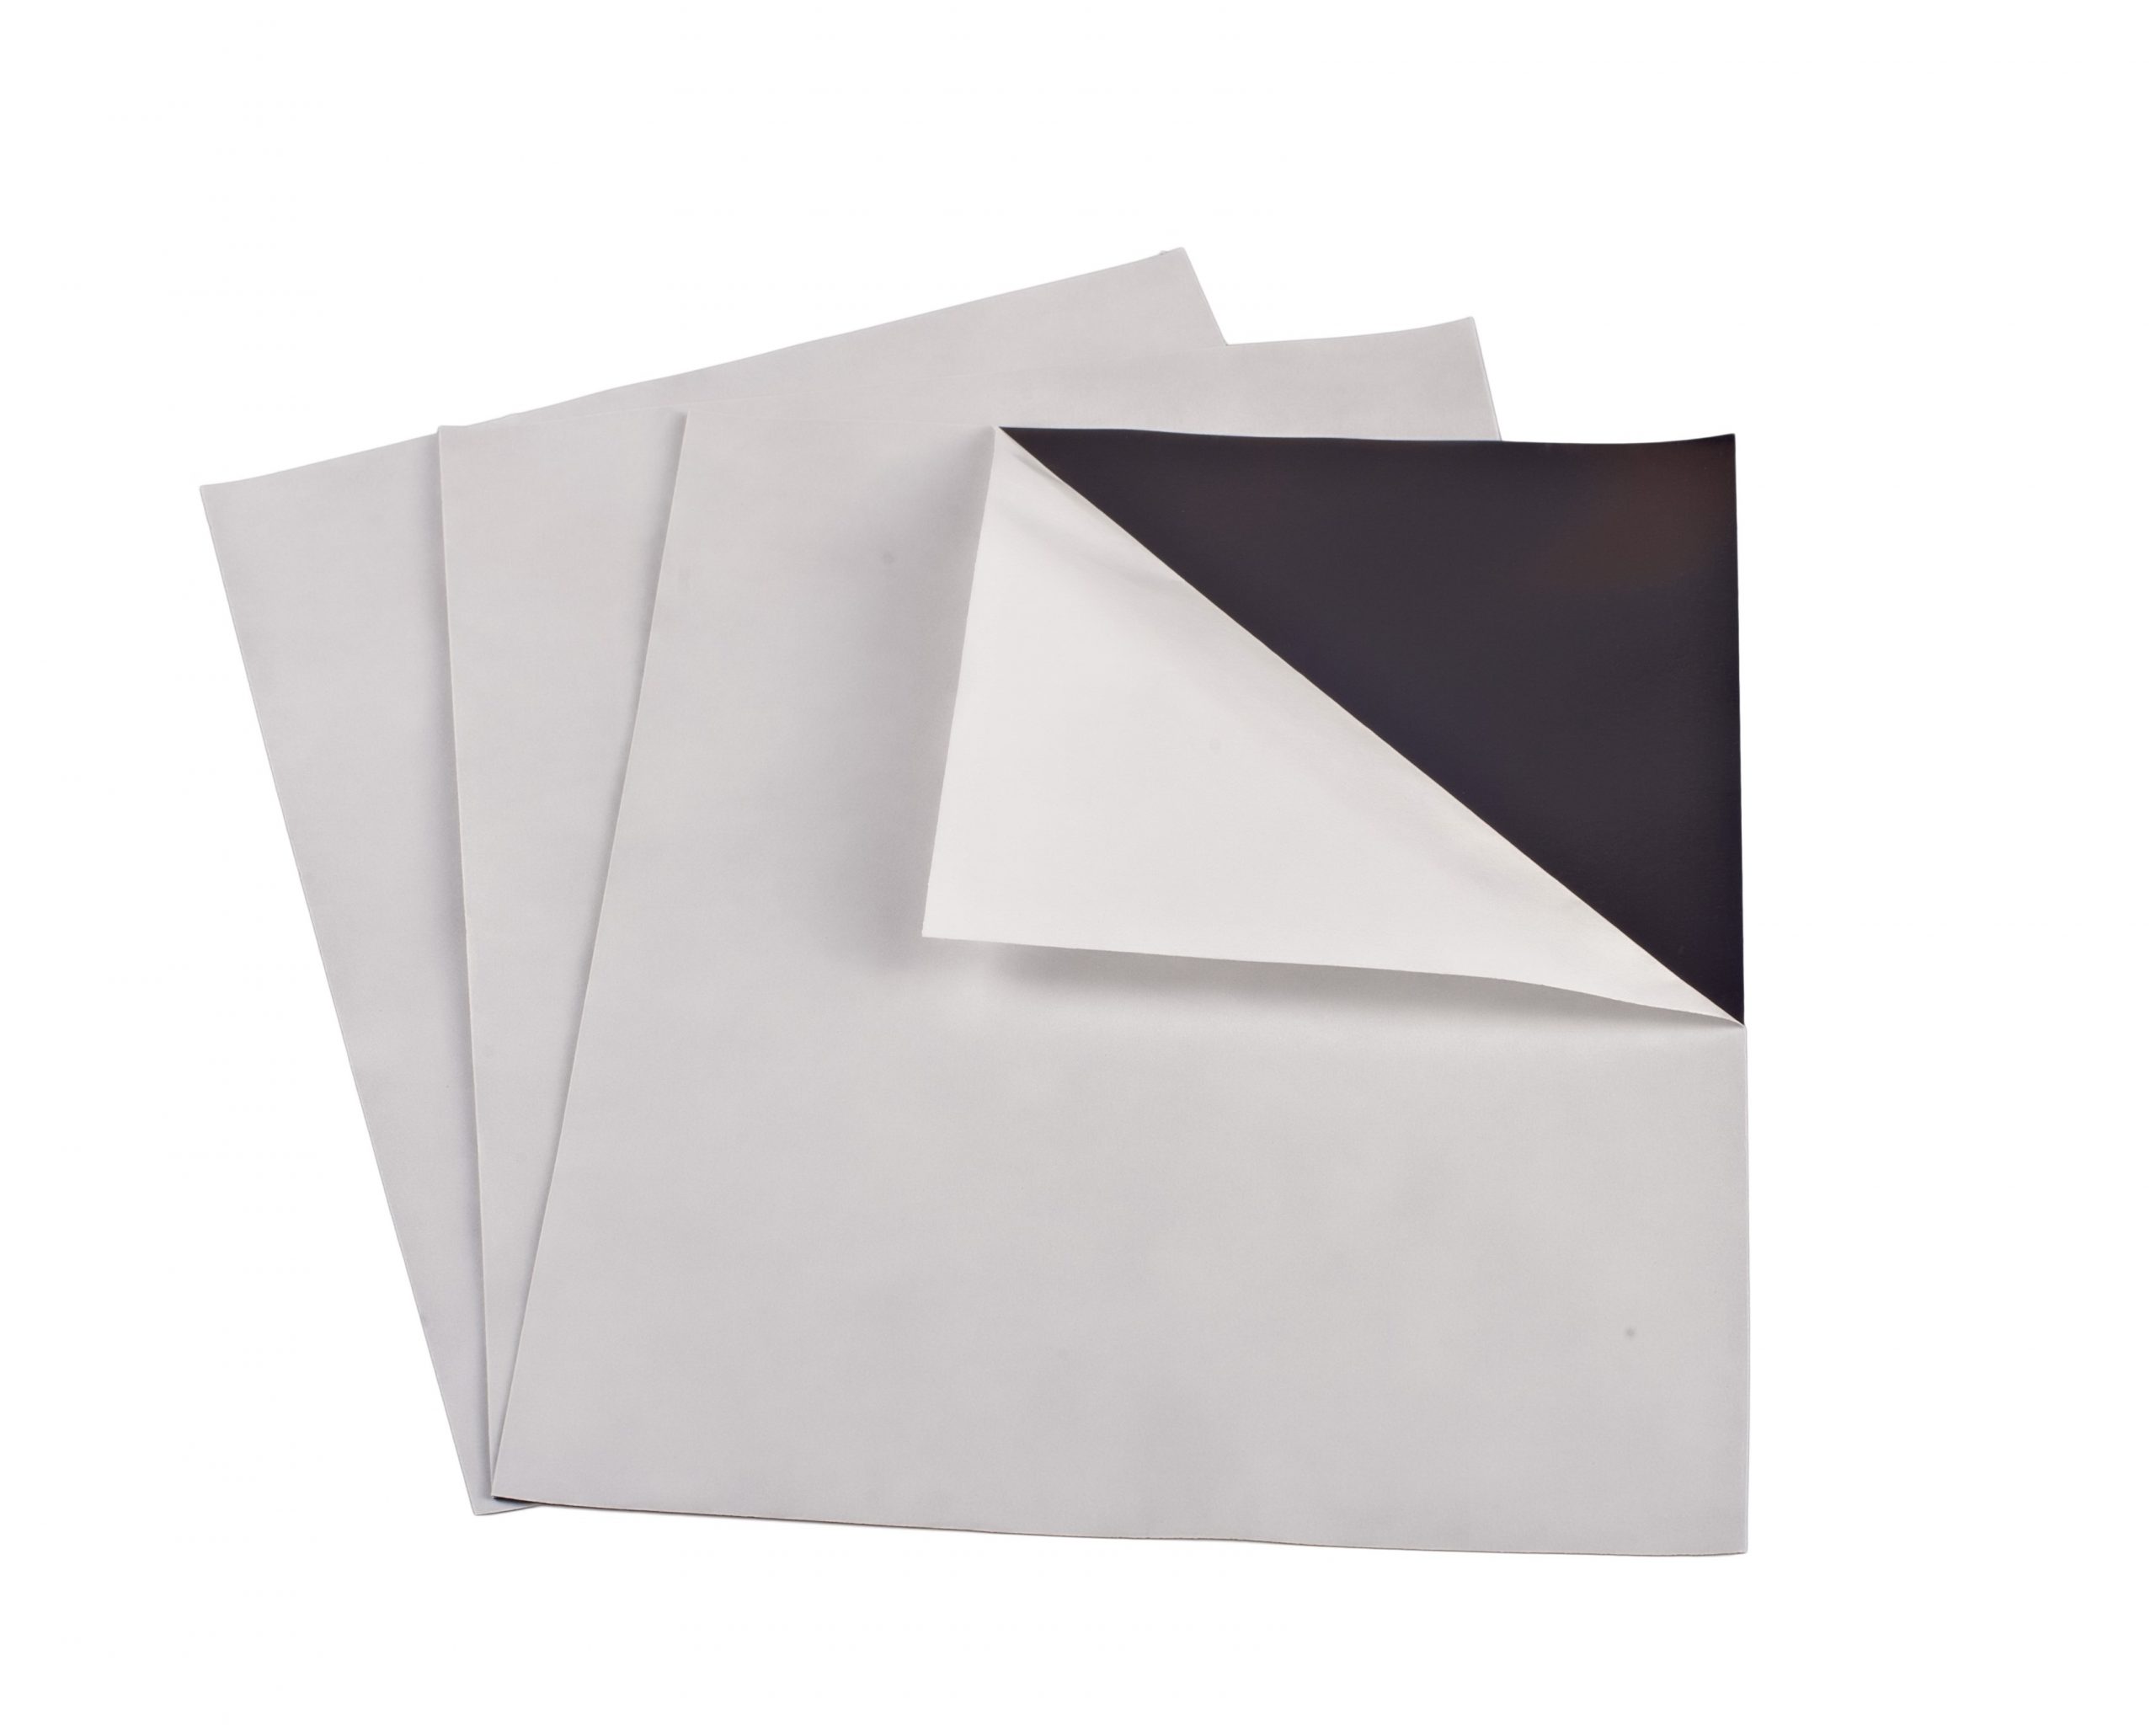  Magnetic Sheets with Adhesive Backing, 8 x 10, 5